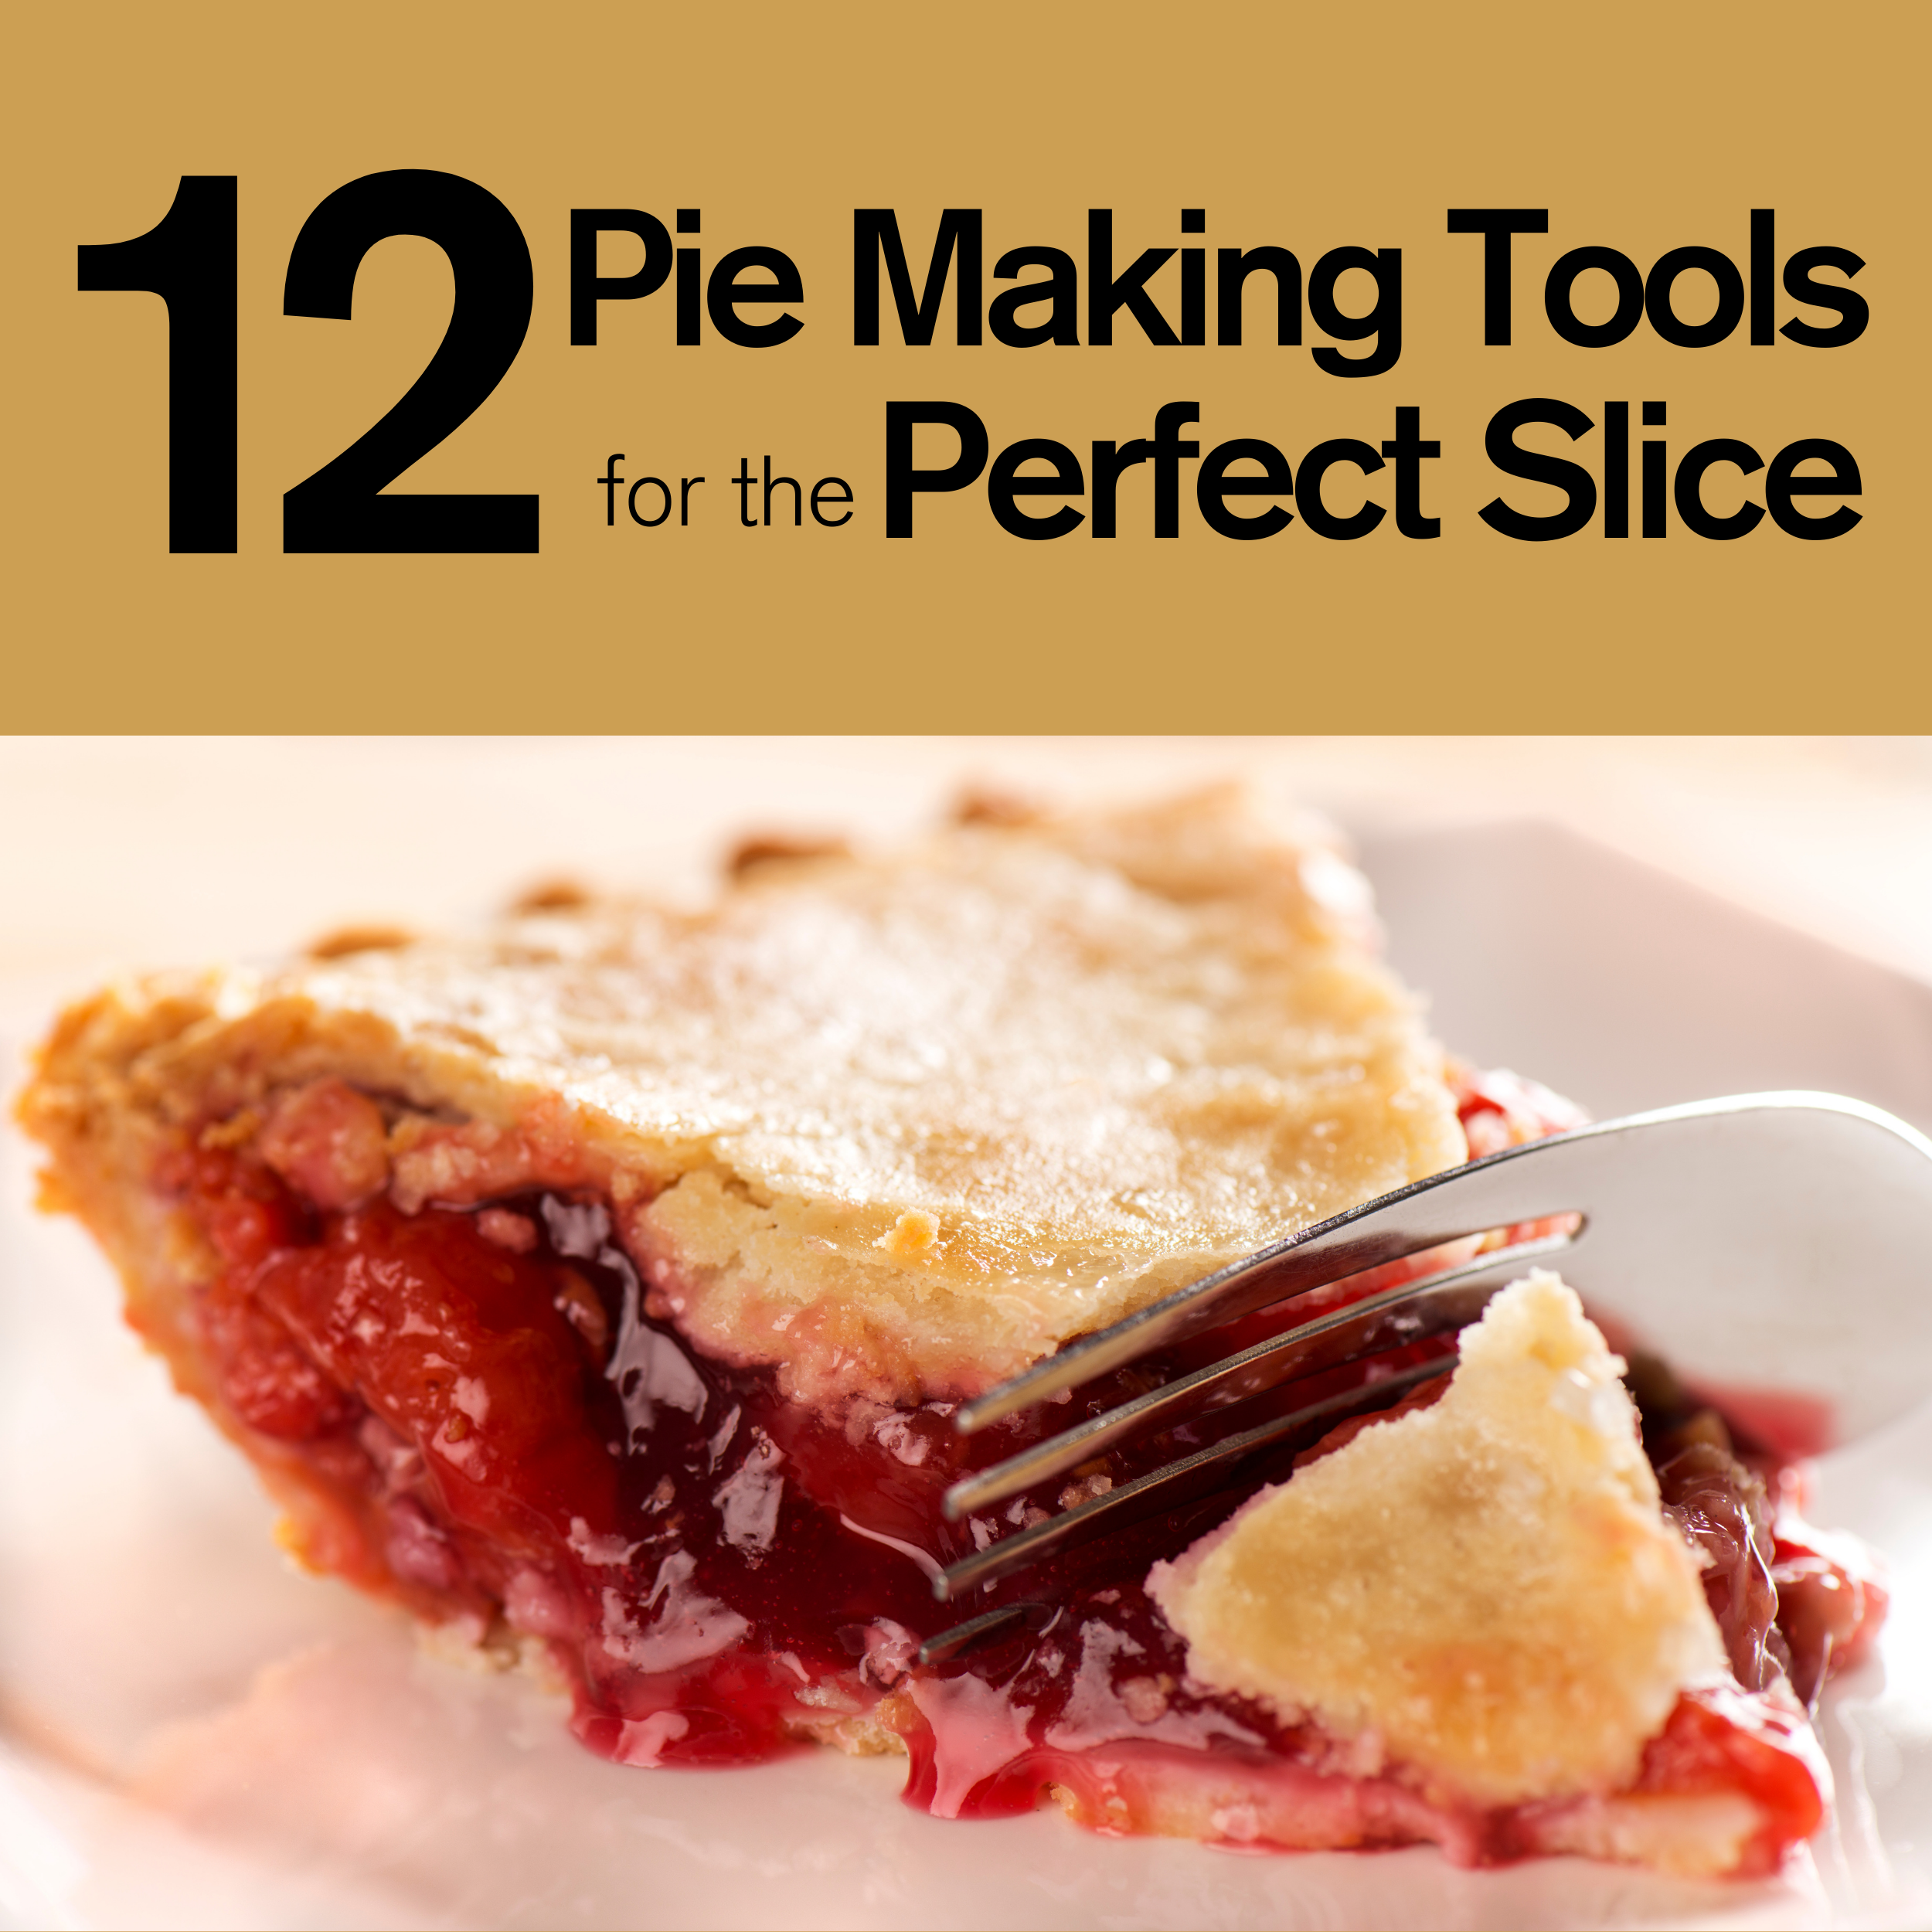 8 Essential Baking Tools to Make the Perfect Pie